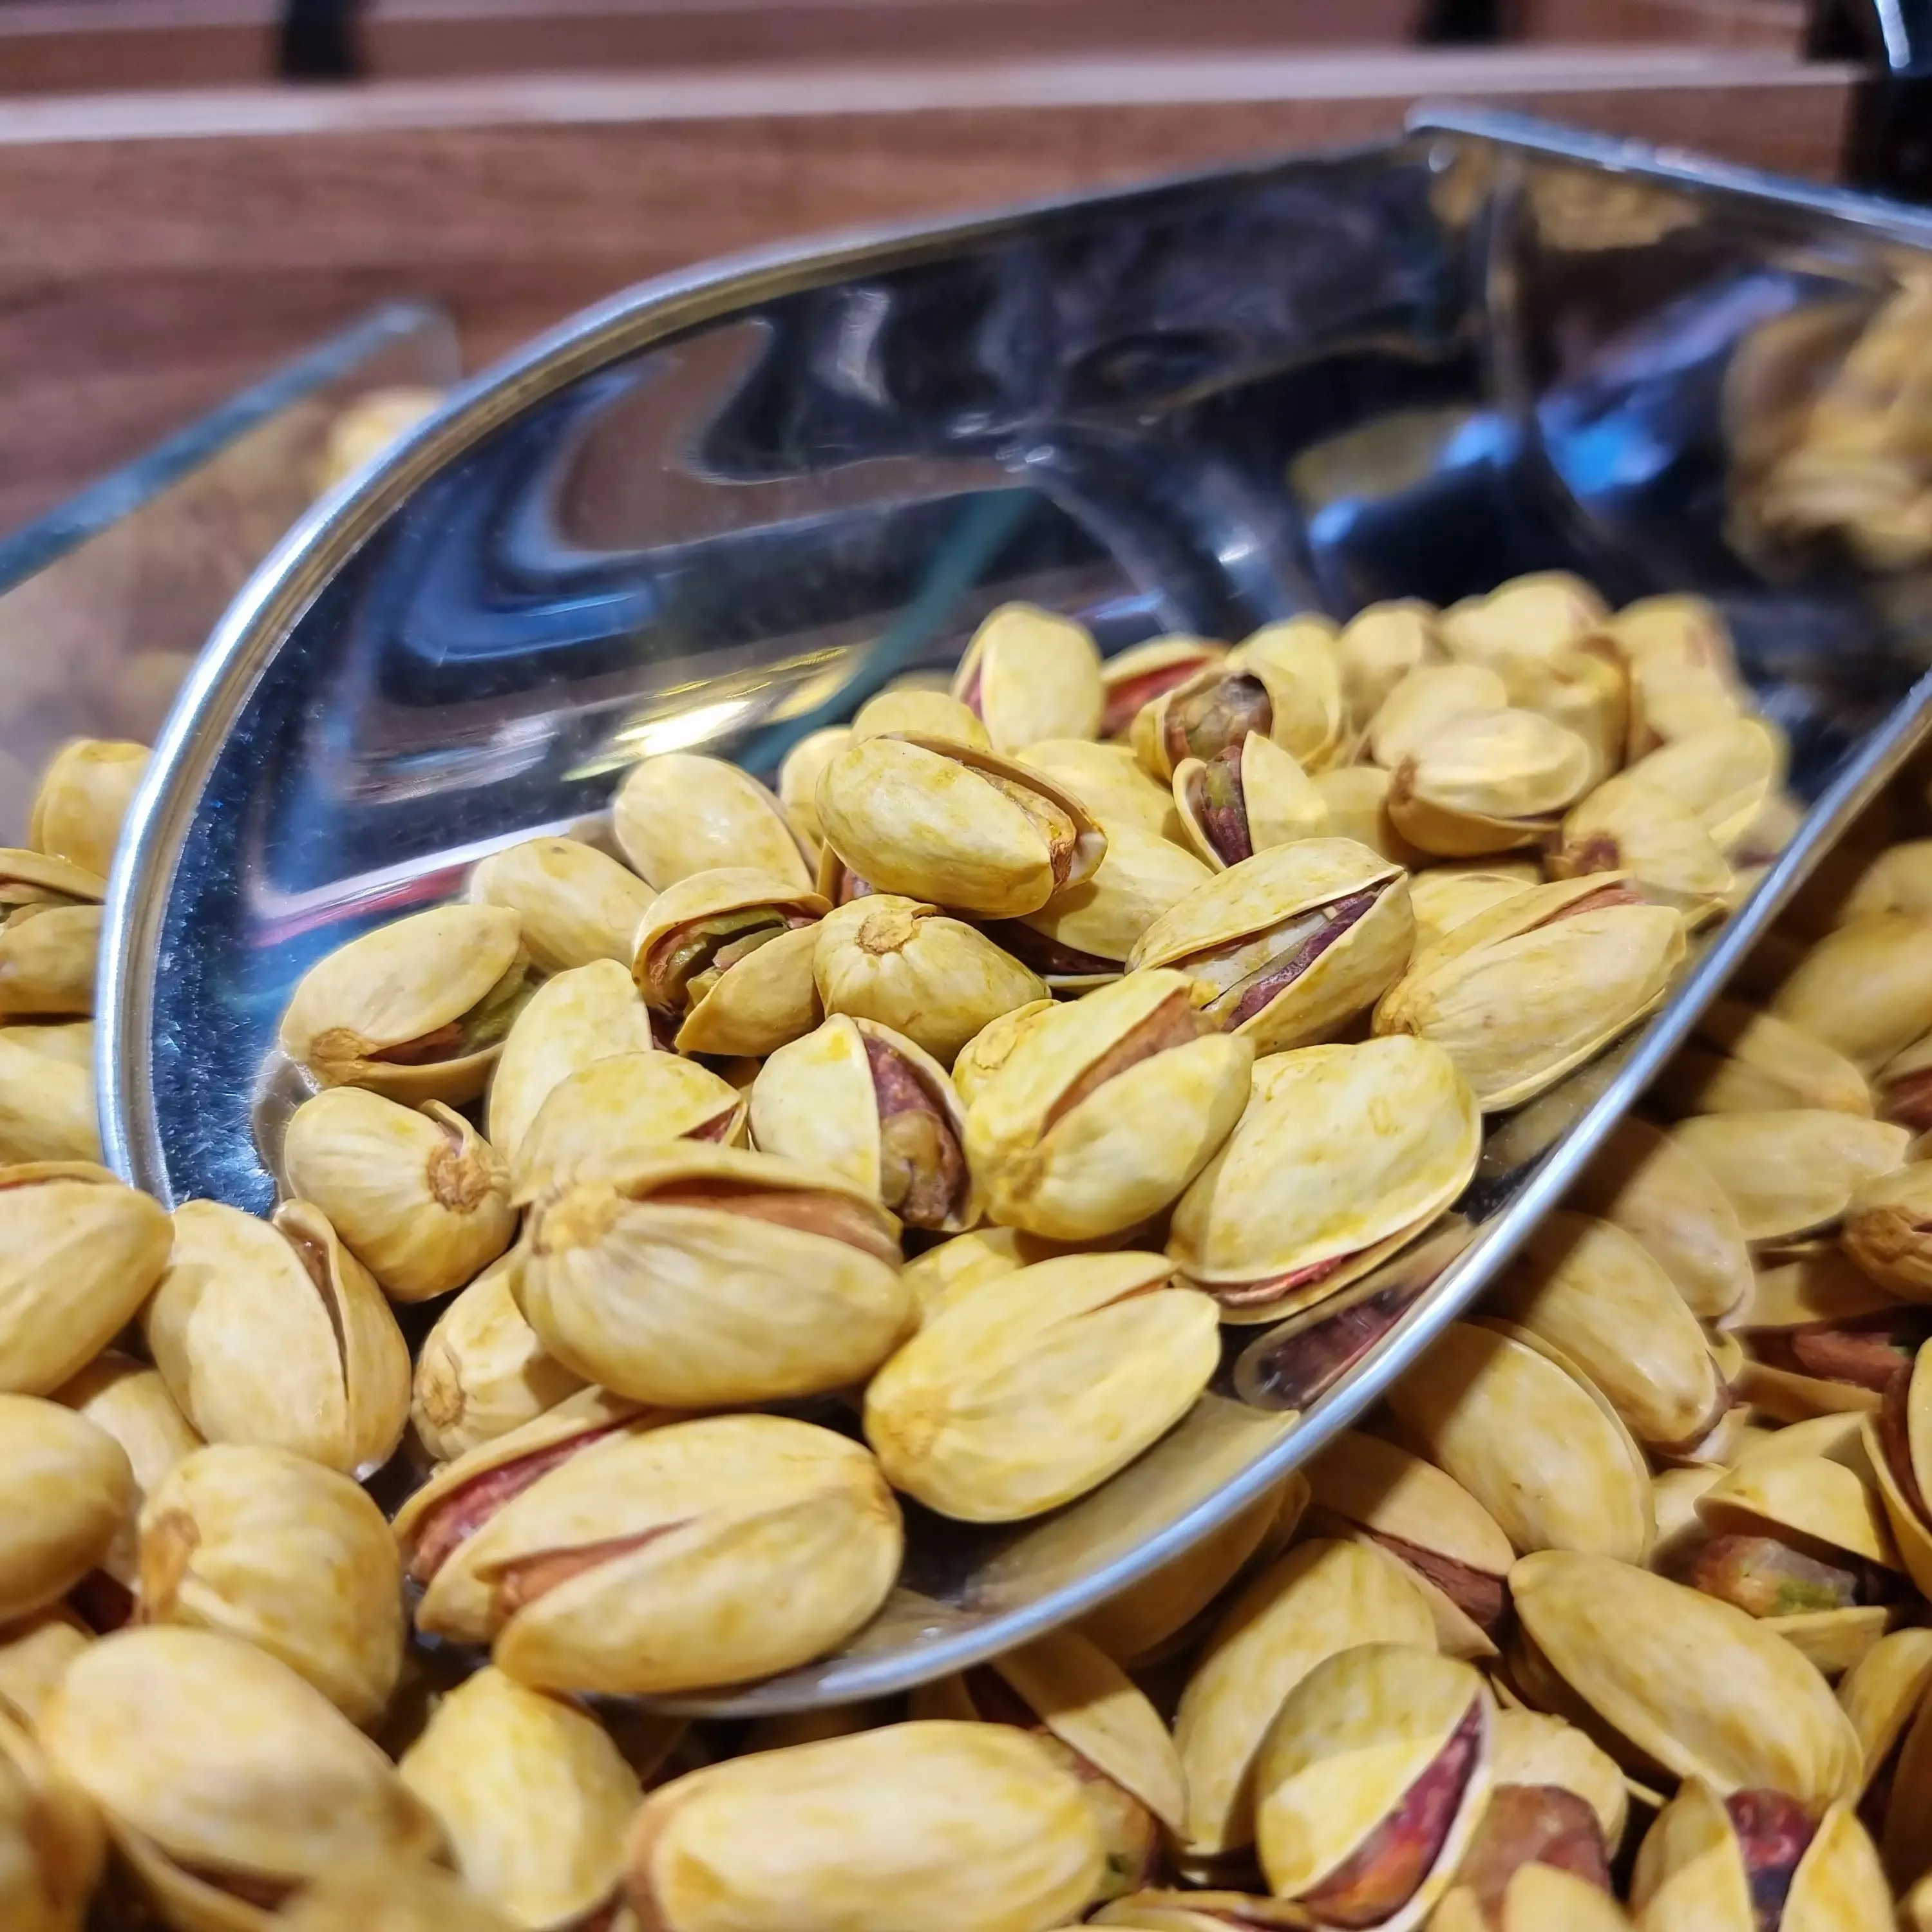 The price of best pistachios aegina from production to consumption